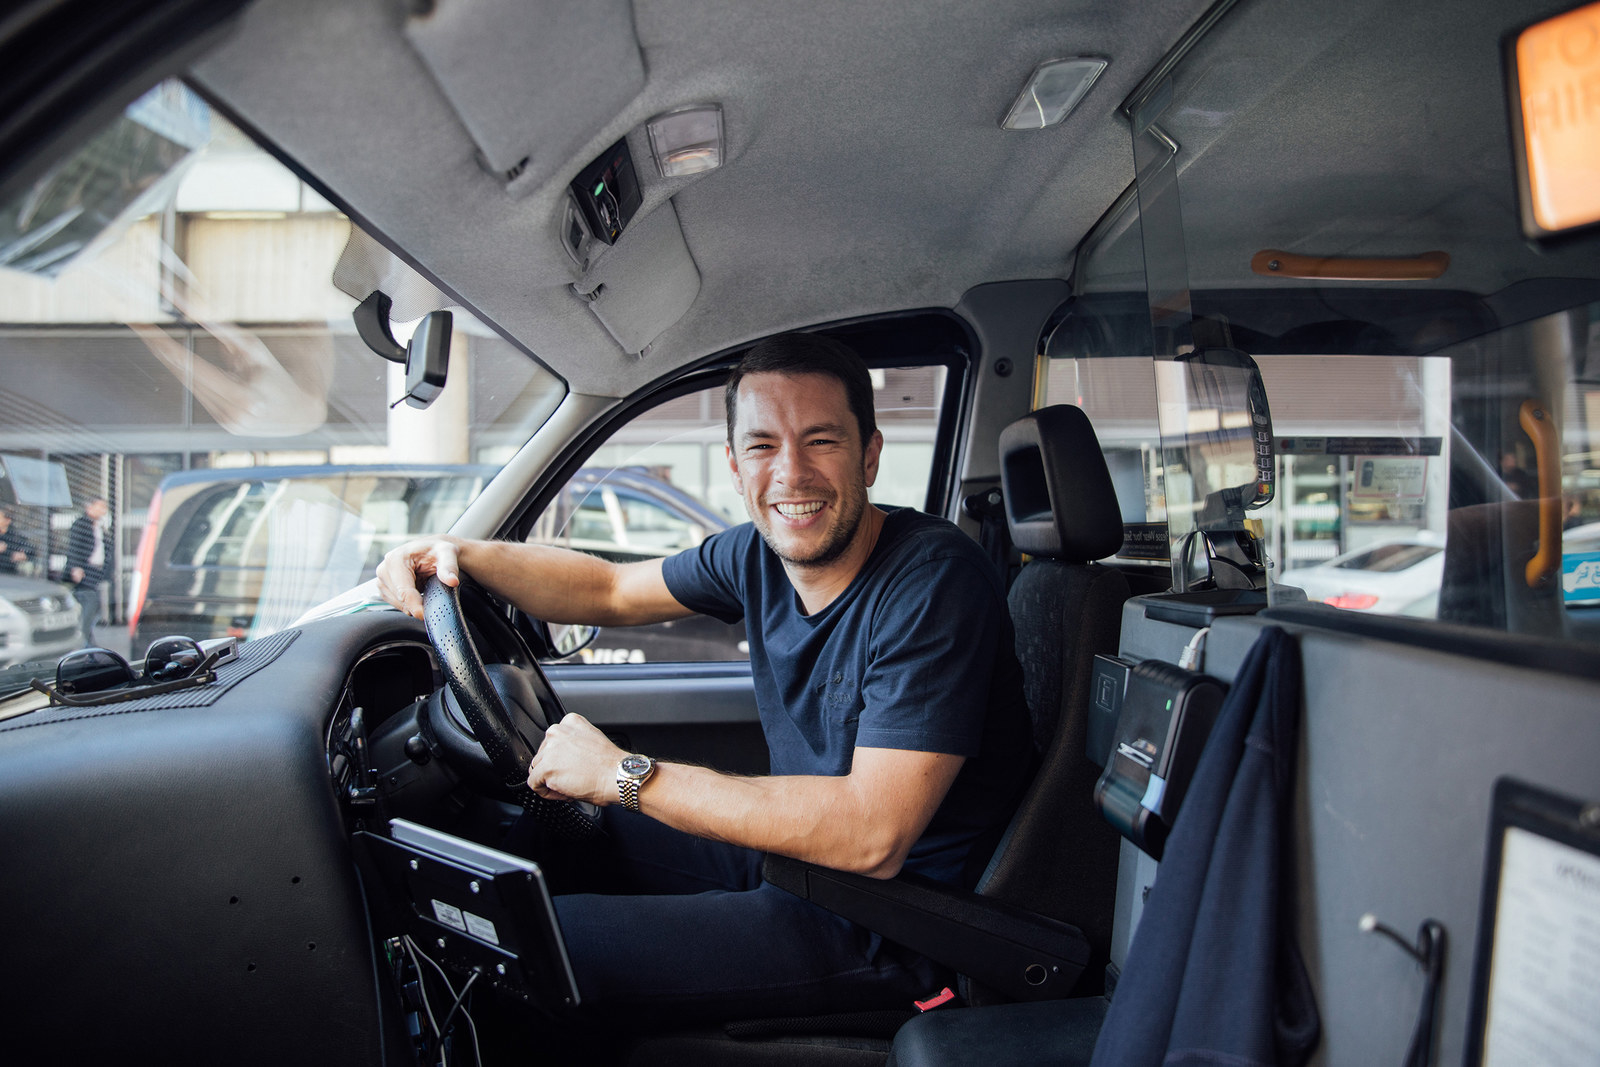 Black-Cab Drivers In London Say They're 